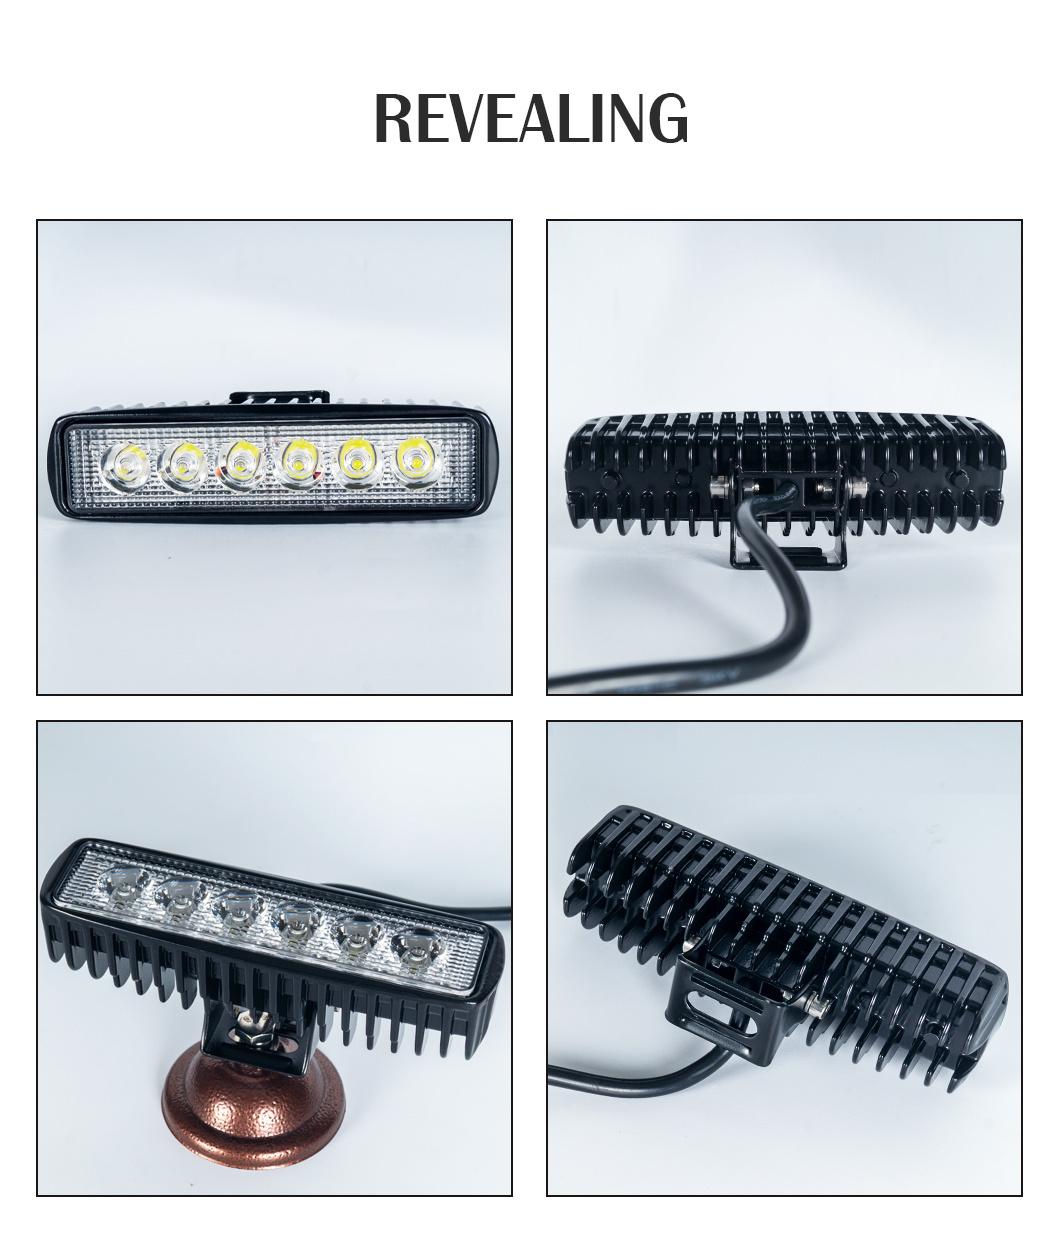 LED Headlights for Offroad Truck Trailer Tractor Car